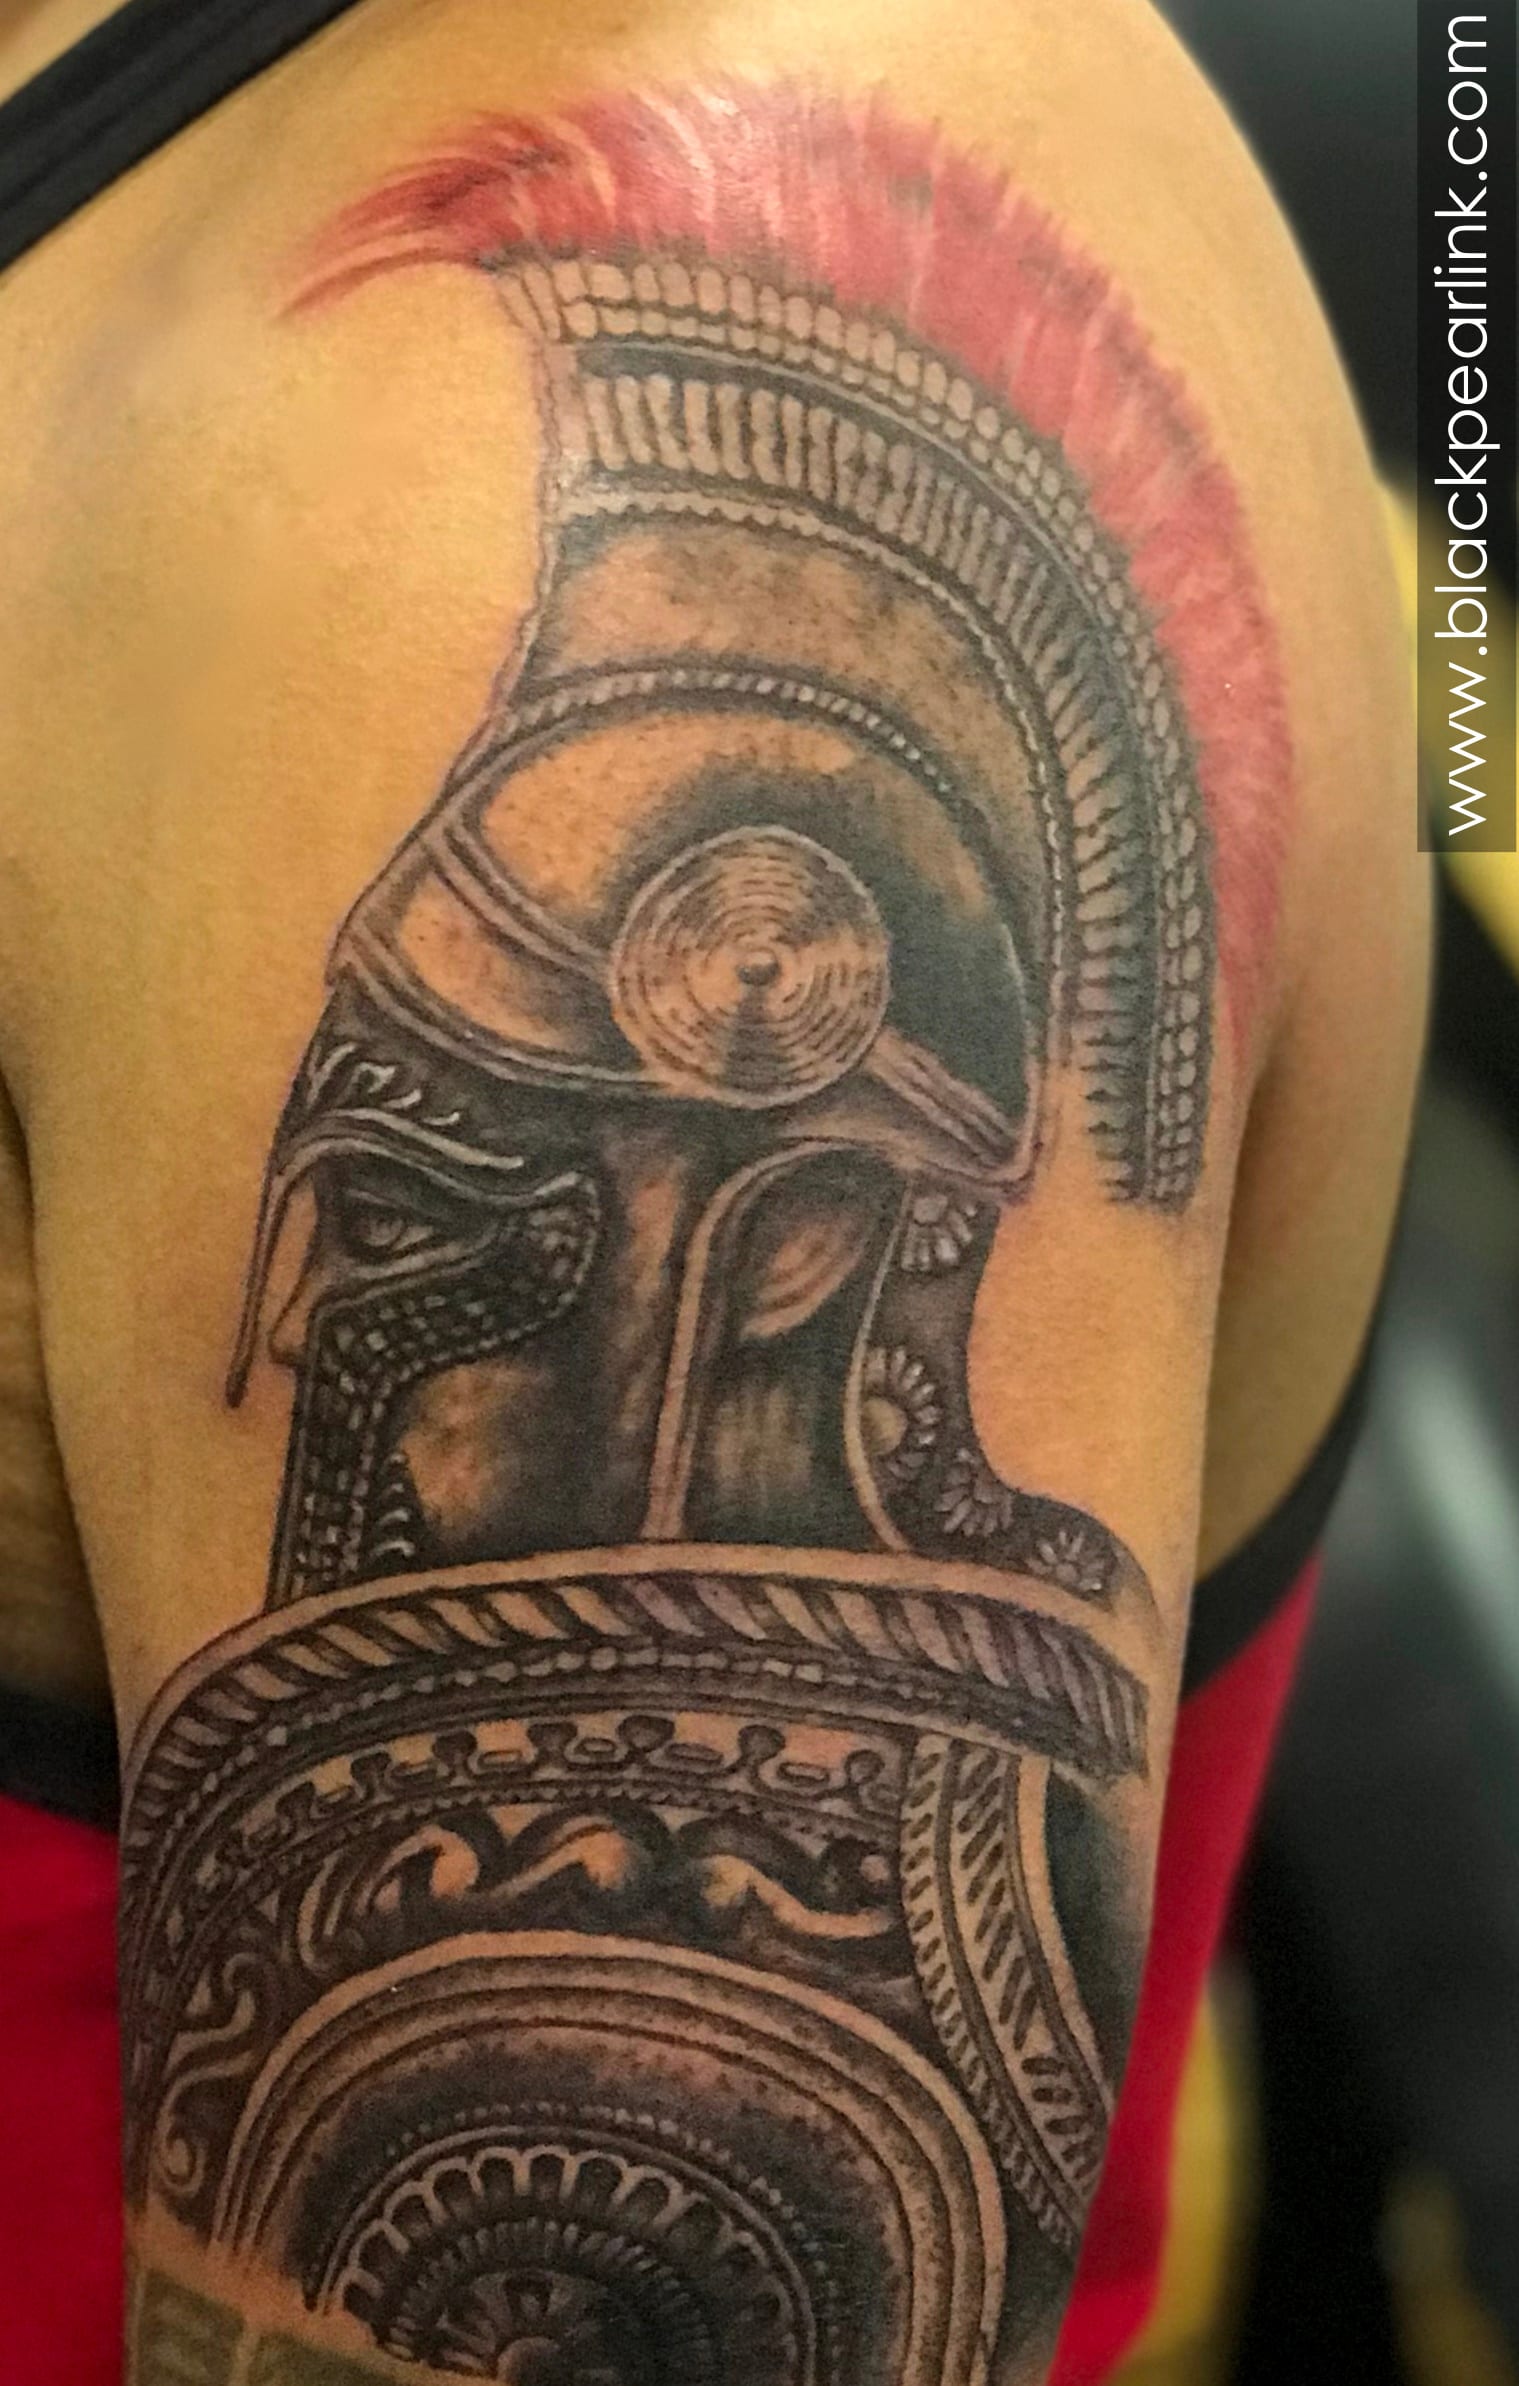 Roman soldier done by hope talbott at Filament Tattoo Co. wabash IN : r/ tattoos